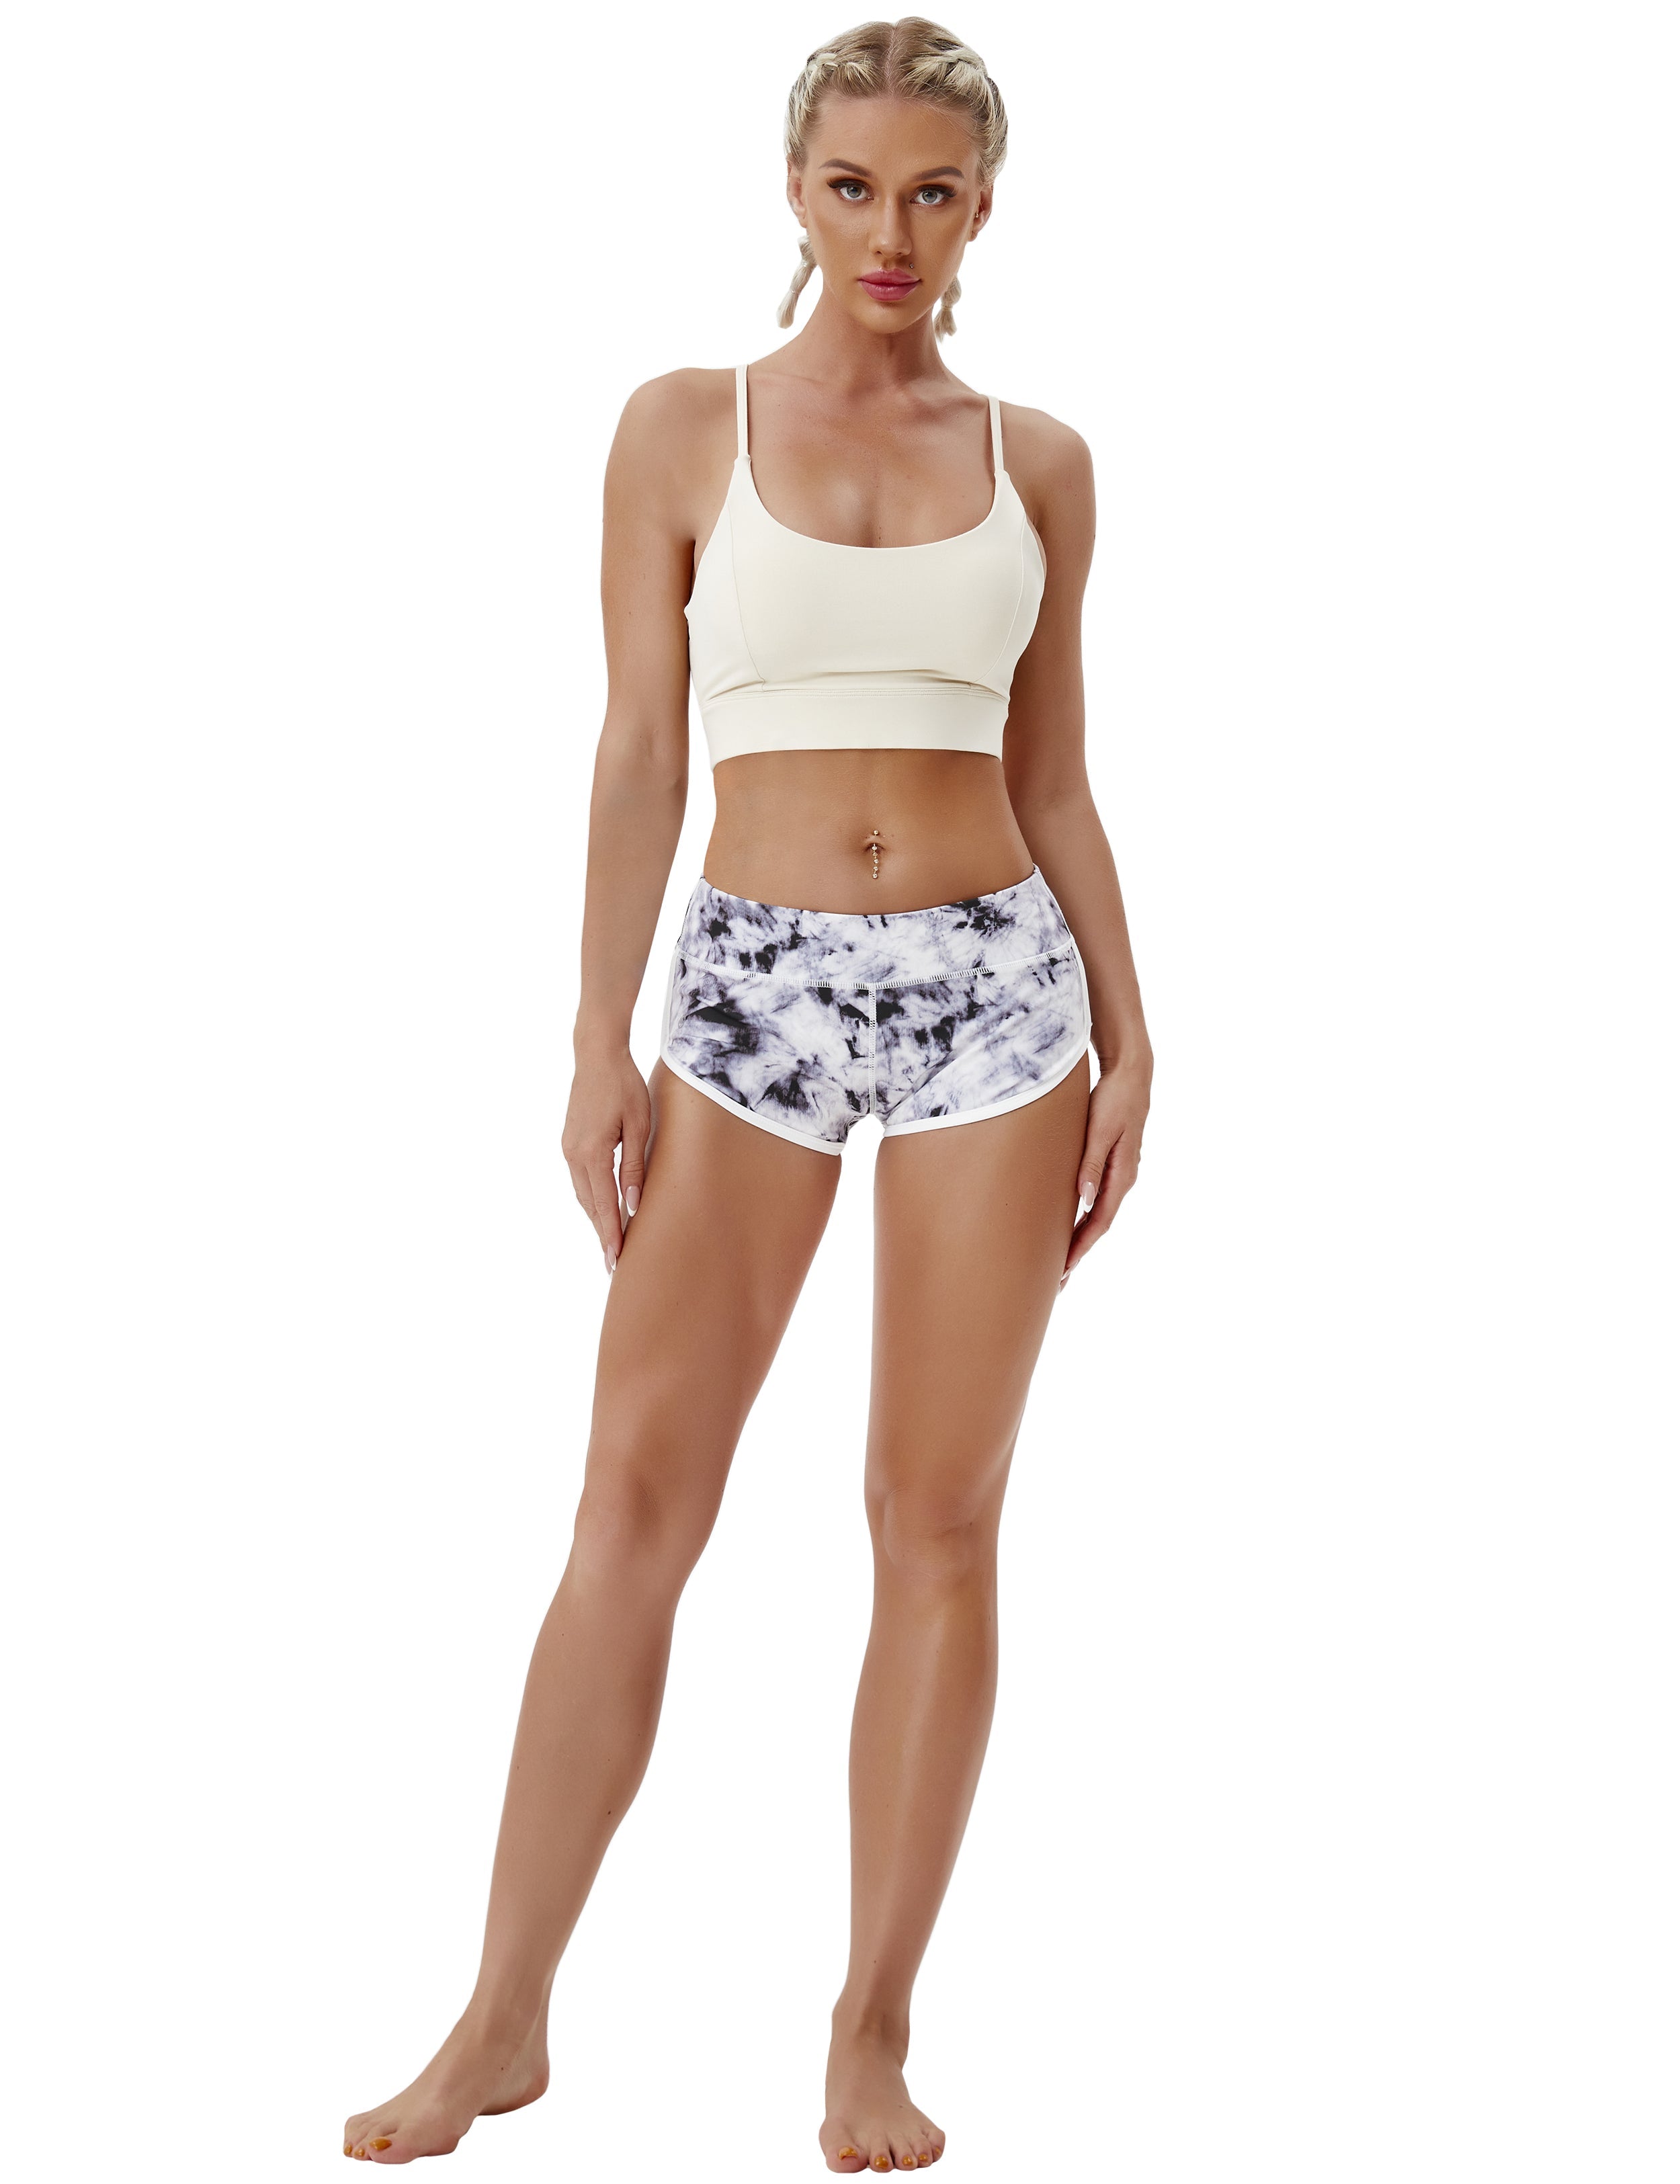 Printed Booty Yoga Shorts black dandelion Sleek, soft, smooth and totally comfortable: our newest sexy style is here. Softest-ever fabric High elasticity High density 4-way stretch Fabric doesn't attract lint easily No see-through Moisture-wicking Machine wash 78% Polyester, 22% Spandex